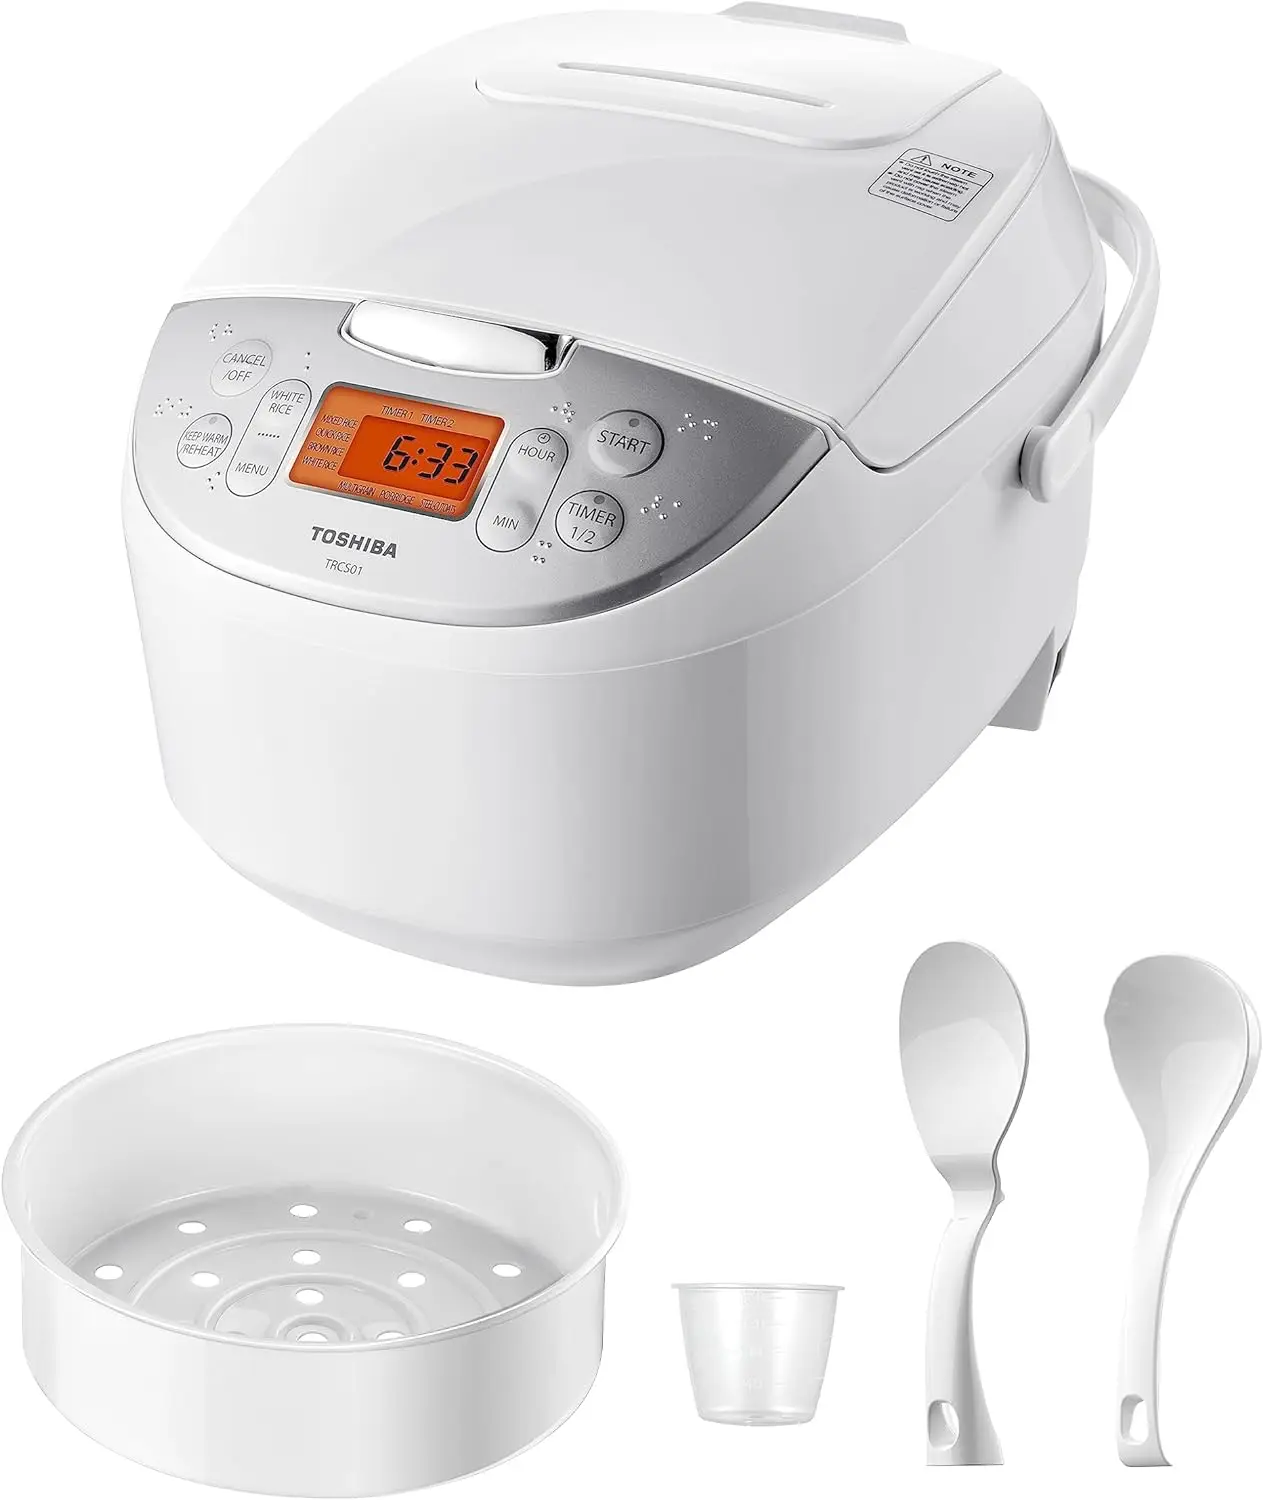 https://ae01.alicdn.com/kf/Sa94a2ec3eeaa4e2d89938e9efda4334bp/Rice-Cooker-6-Cup-Uncooked-u2013-Japanese-Rice-Cooker-with-Fuzzy-Logic-Technology-7-Cooking-Functions.jpg